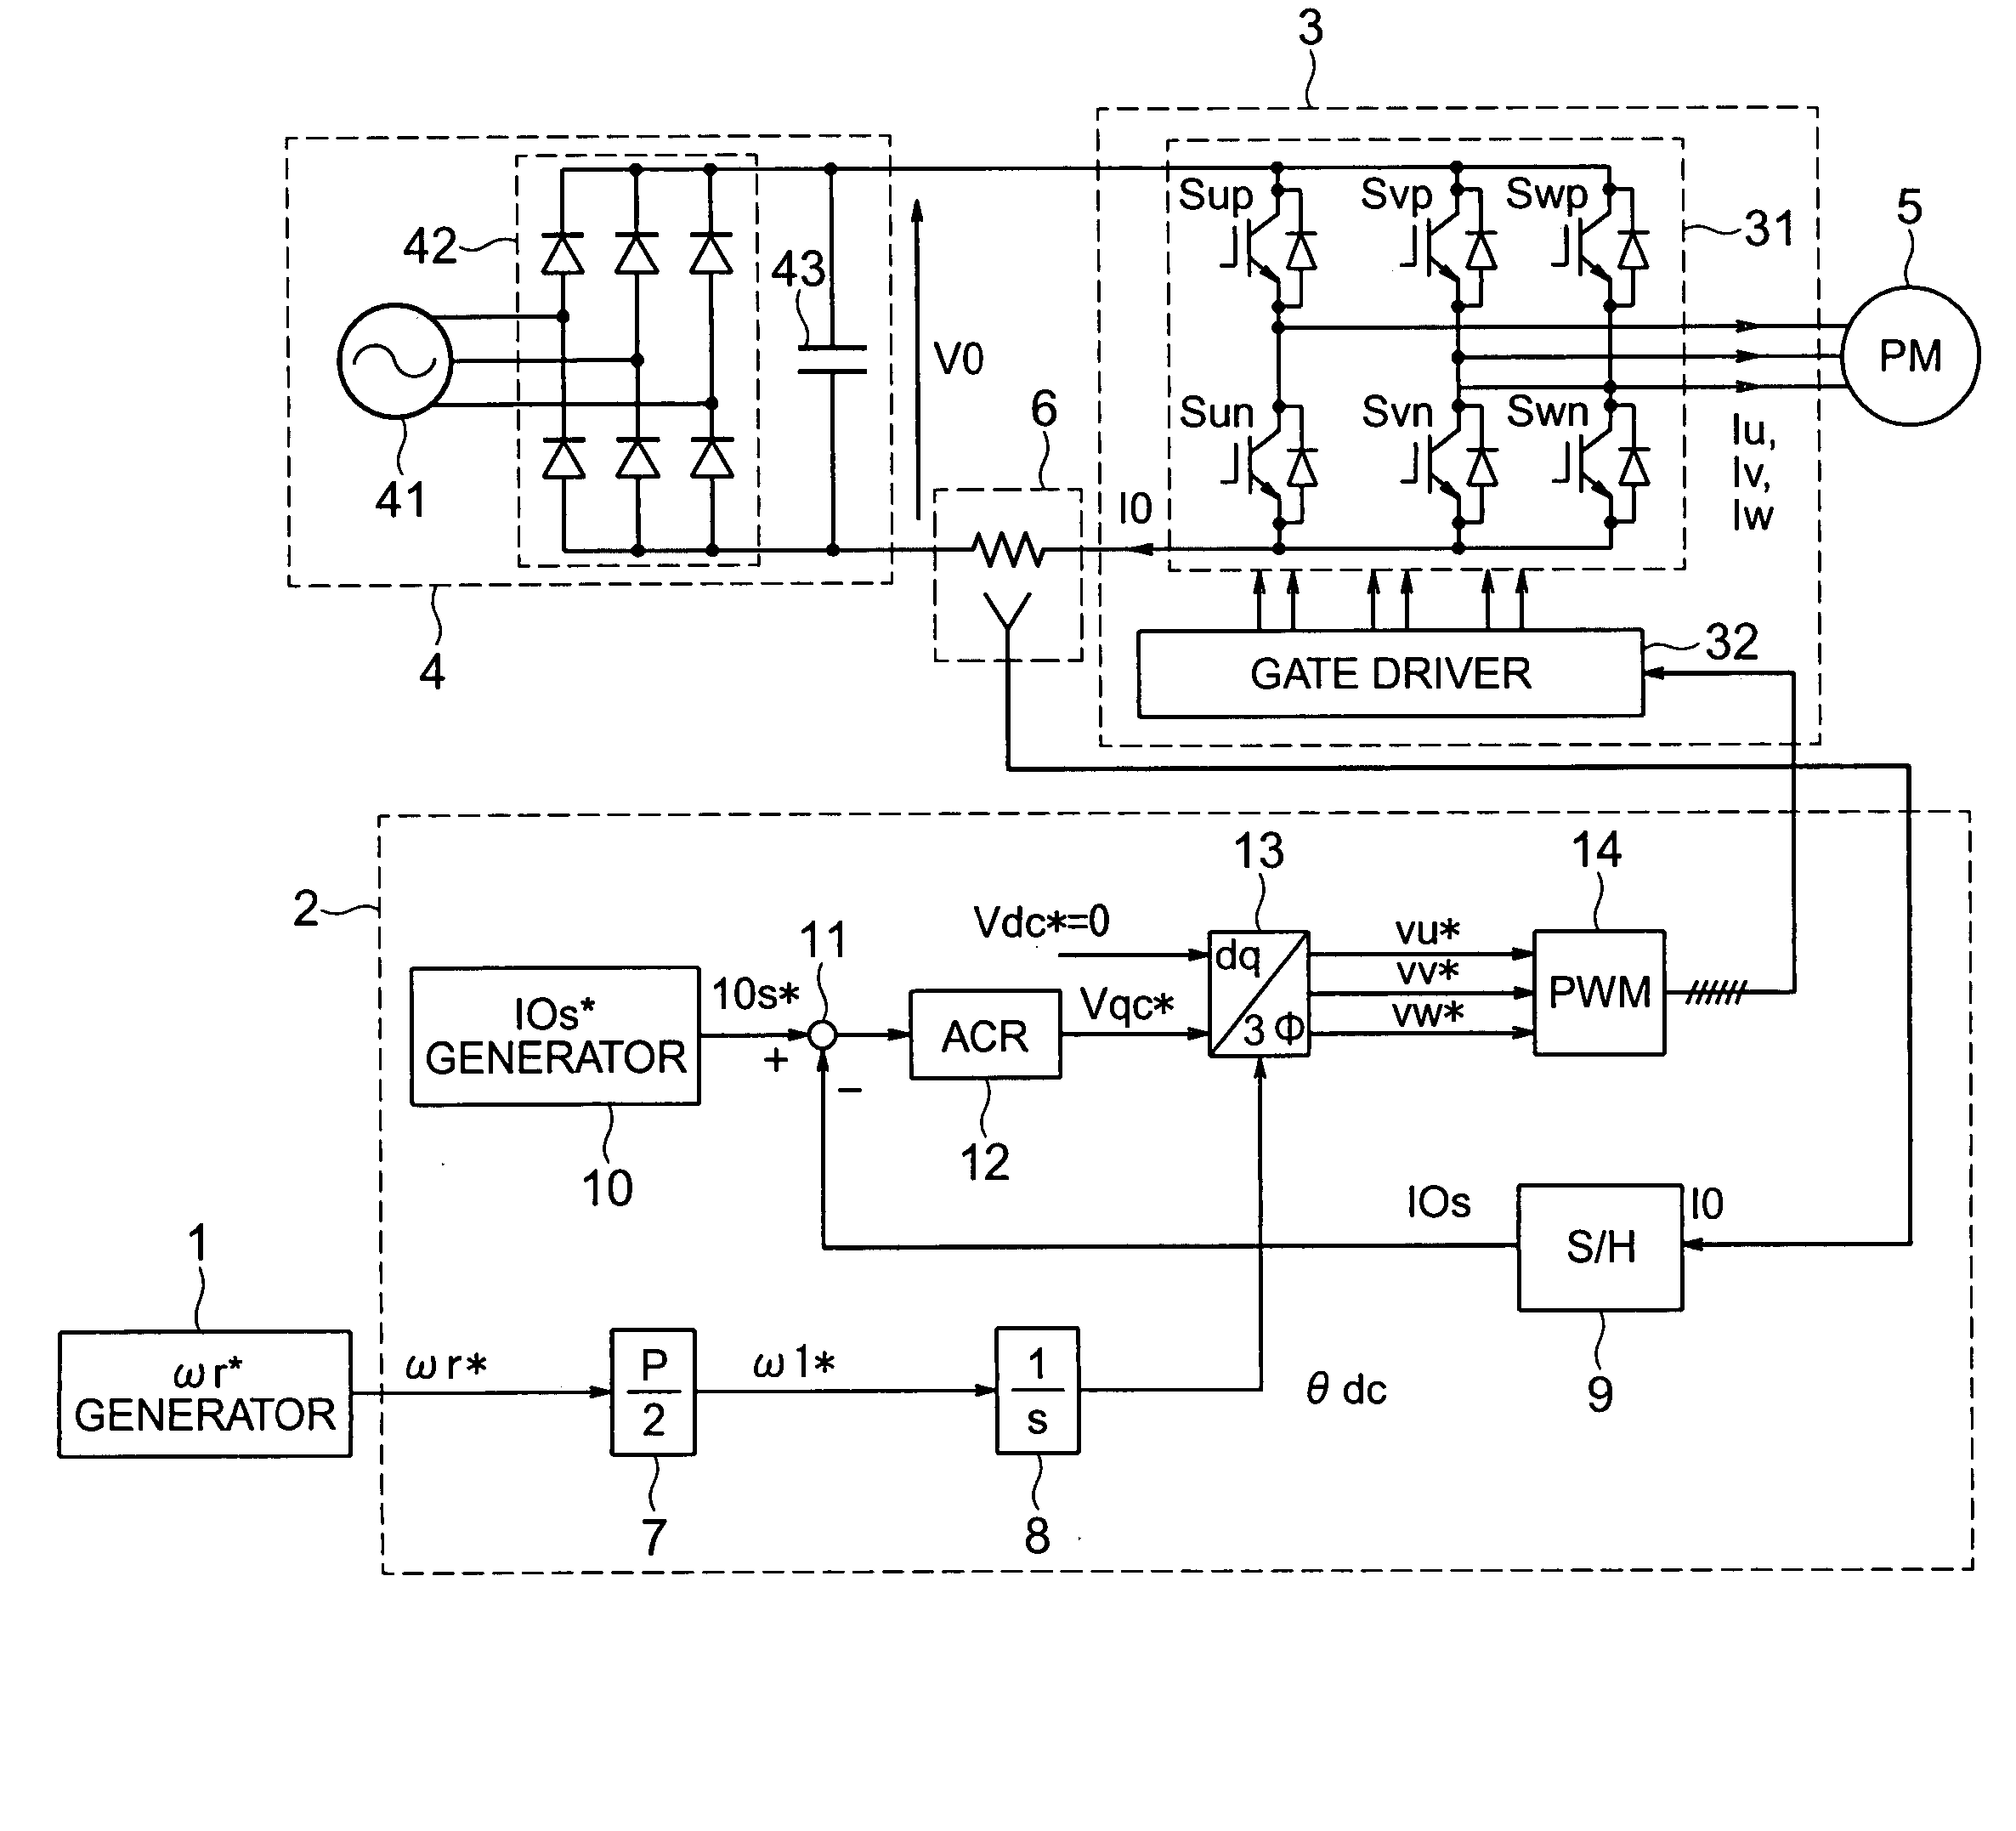 Motor drive system for AC motors